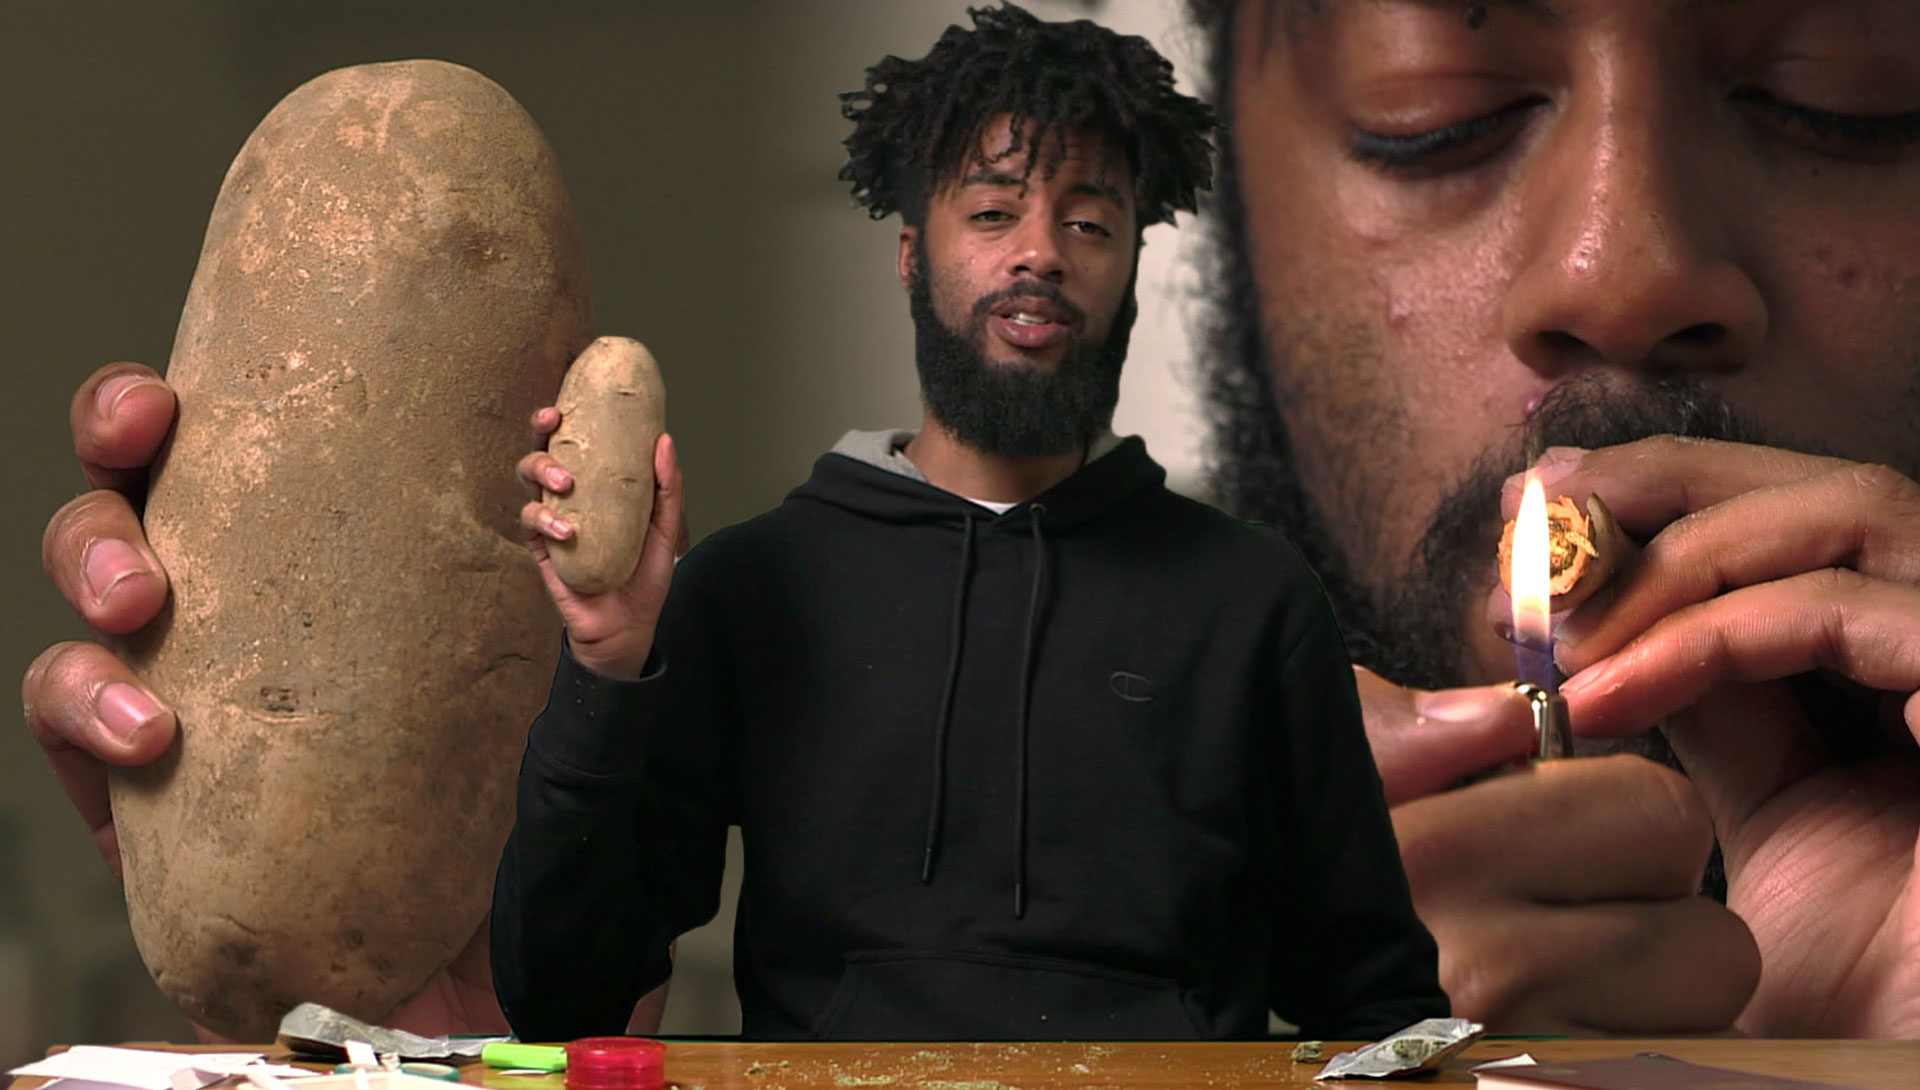 How to Make a One-Hitter Out of a Potato - VICE Video: Documentaries,  Films, News Videos